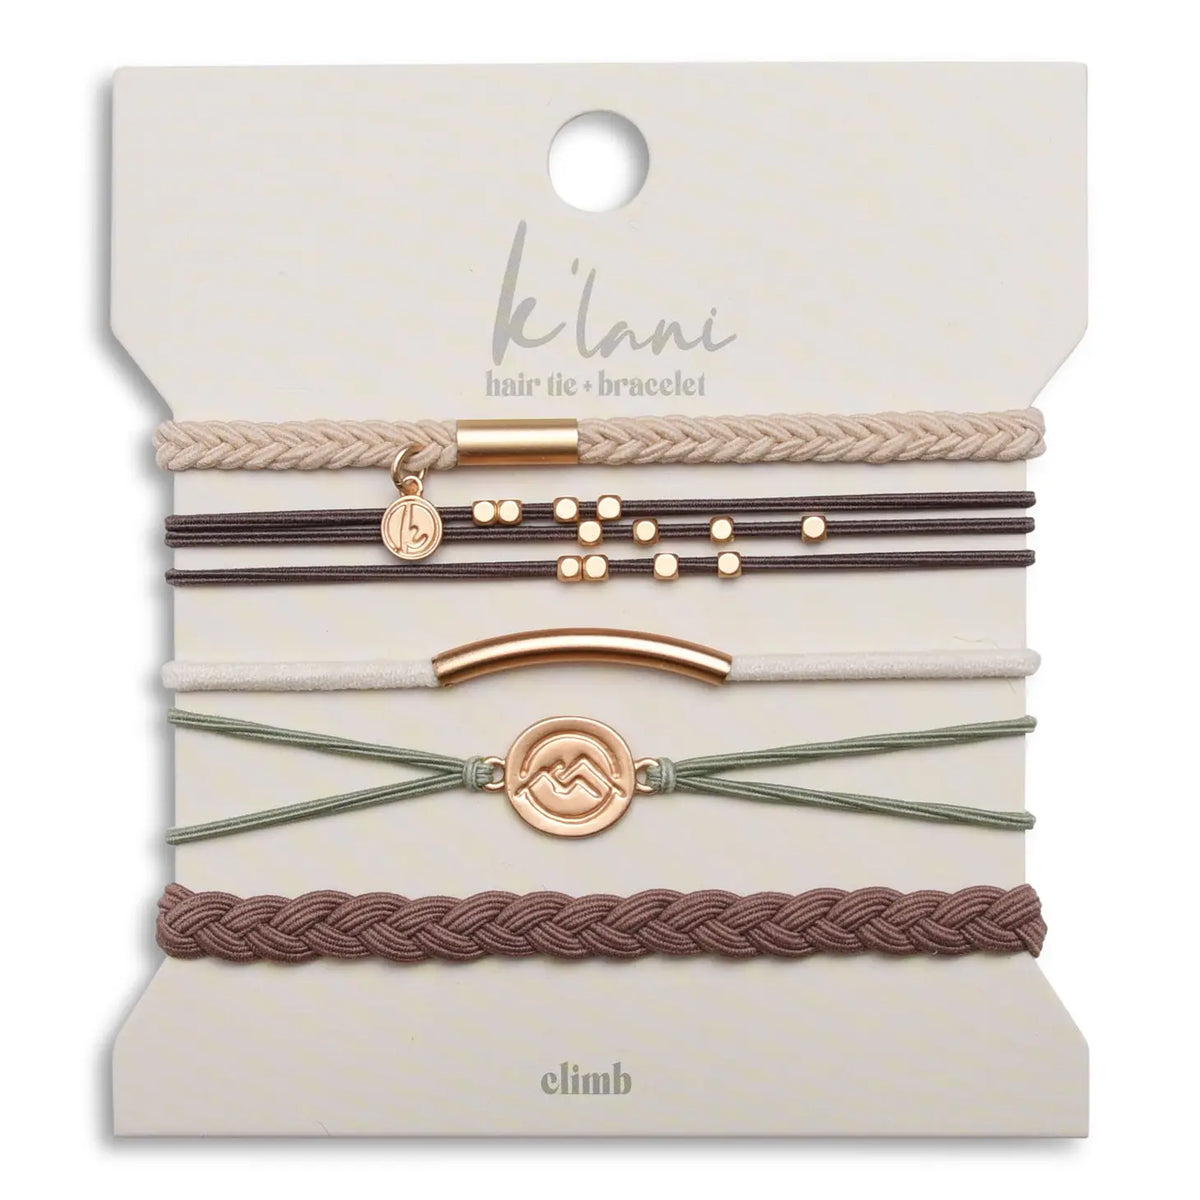 Climb View. K'Lani Hair Tie Bracelets-Stocking StuffersAccessory Template | VerClare Boutique | Chenoa, IL-Everyone has been waiting for these classy heels and they are finally coming! 3.75” heel. Located in Chenoa, Illinois about 20 minutes outside of Bloomington & Normal, IL in McLean County. Free Shipping on eligible Orders. Shop Pay Accepted-VerClare Boutique